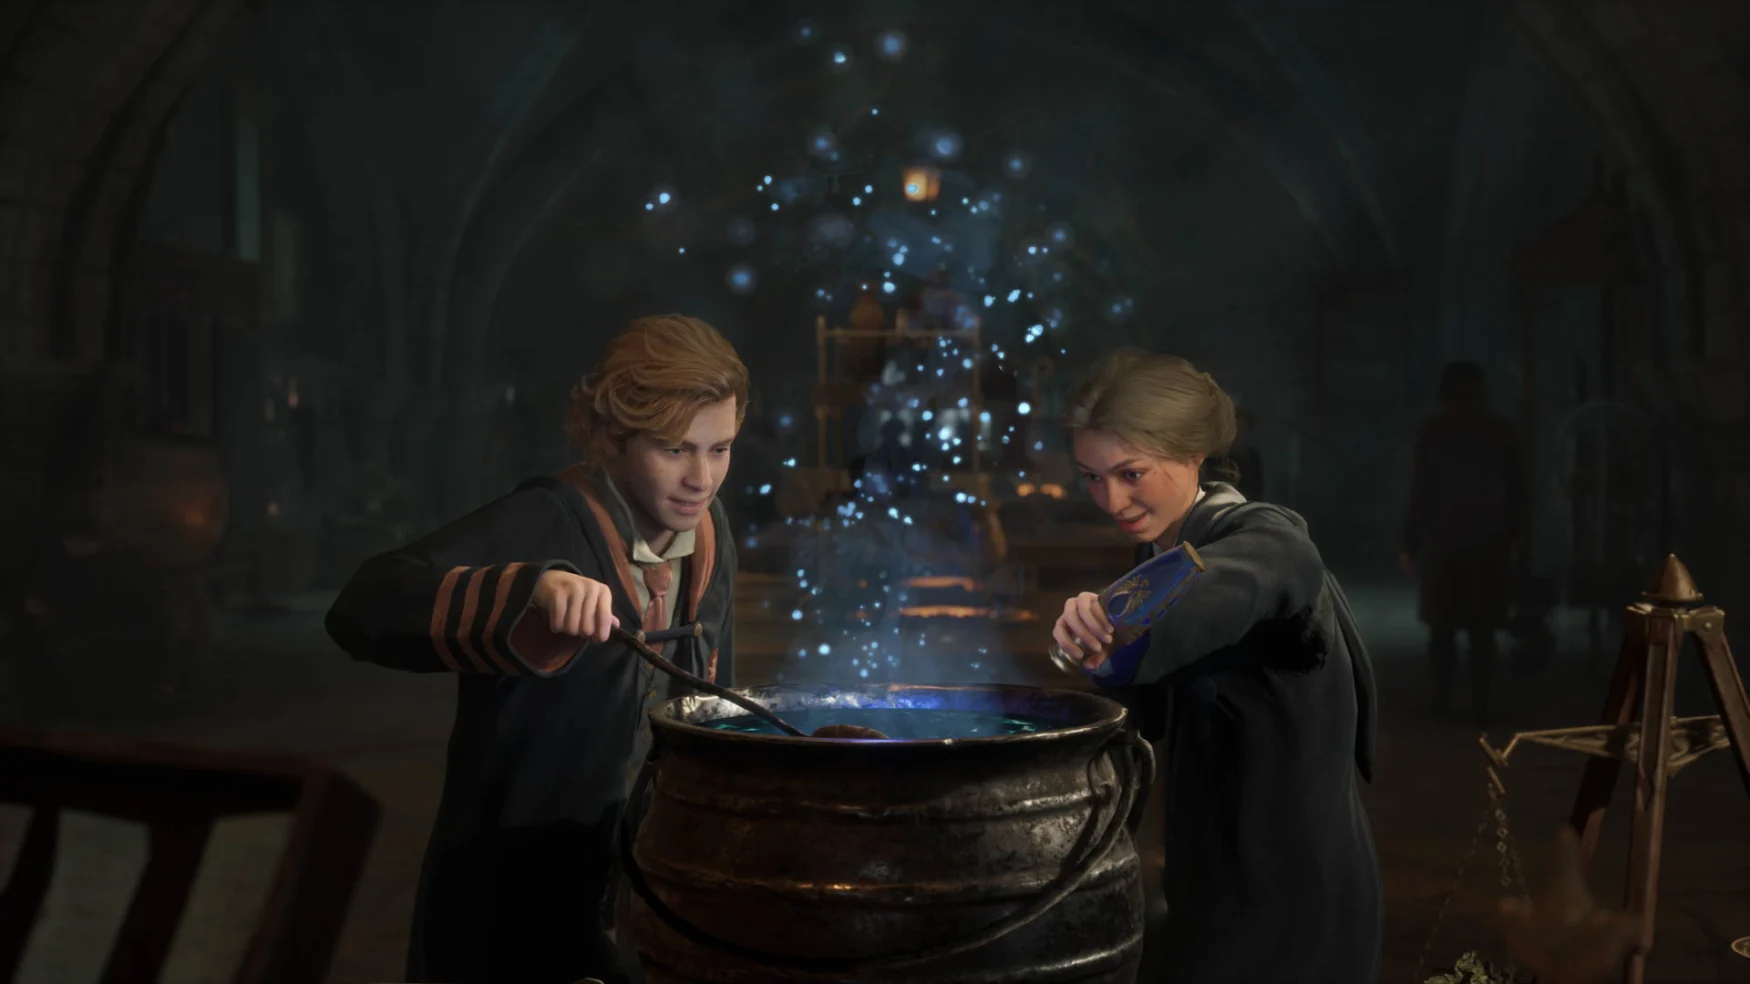 Two students in Hogwarts school robes brew a potion as blue smoke rises from the cauldron.